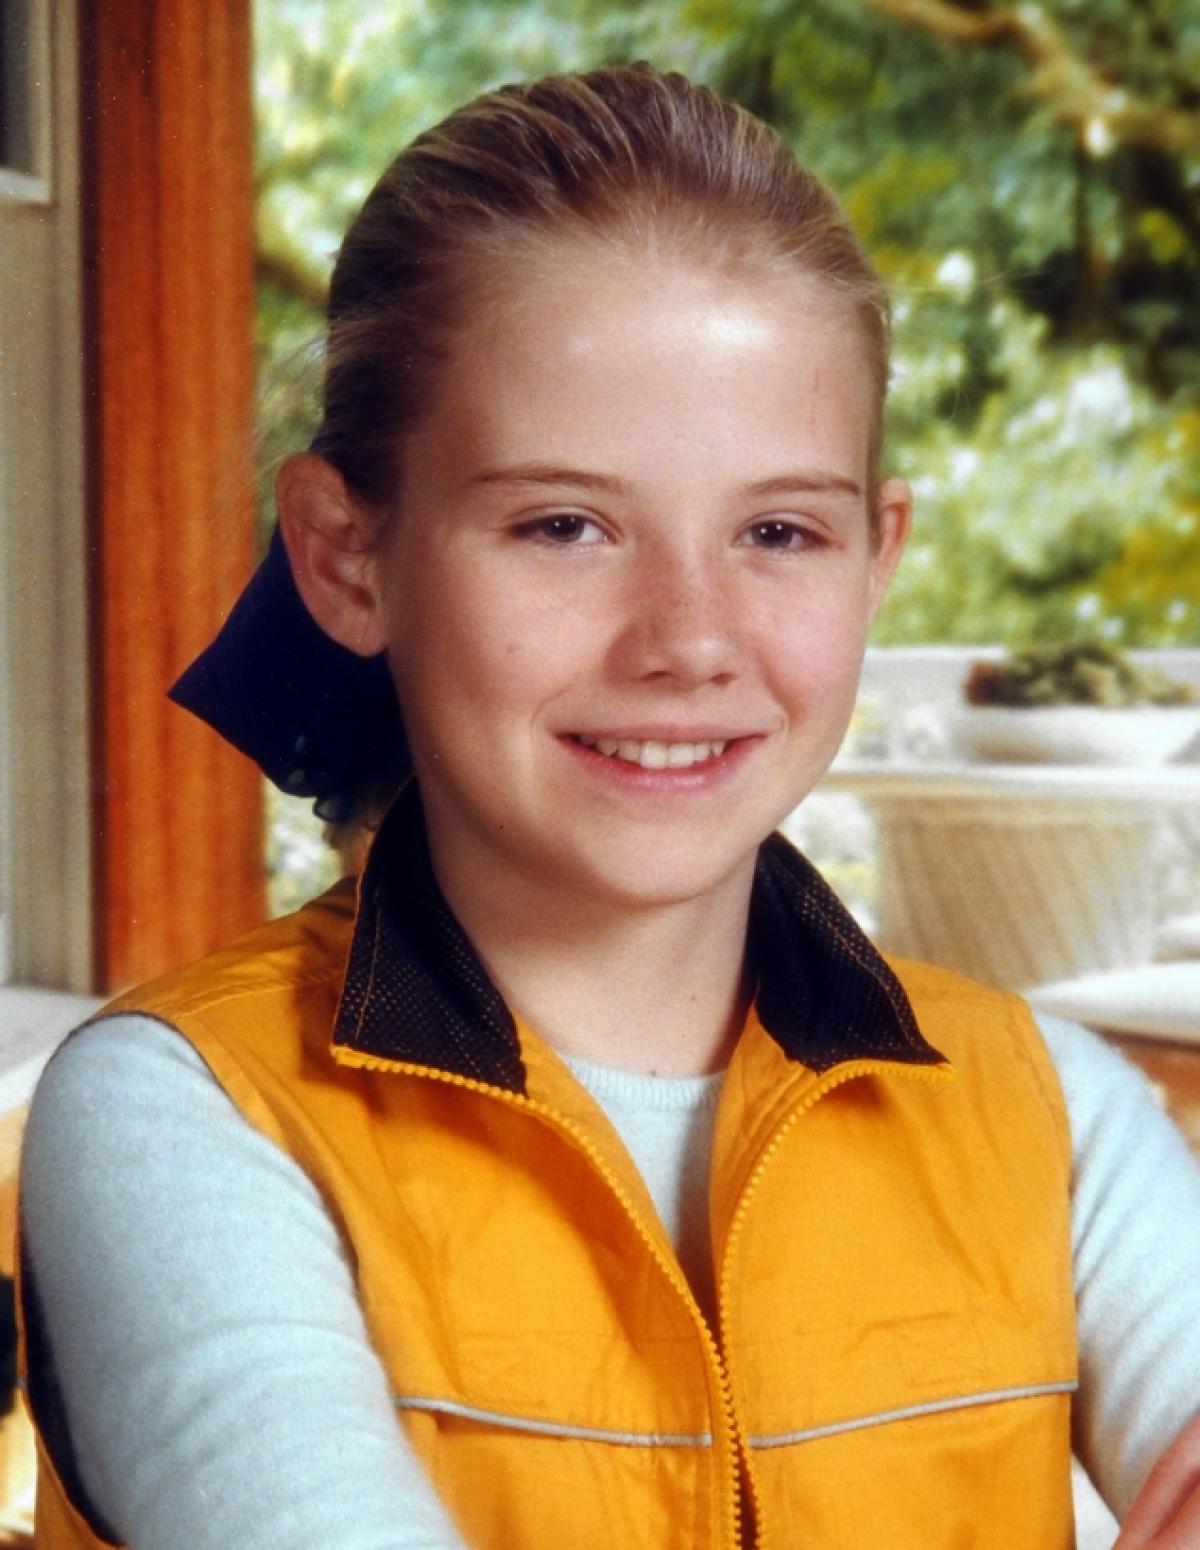 A photo of Elizabeth Smart as a little girl. She sits smiling at the camera in a yellow vest and long-sleeved white shirt.